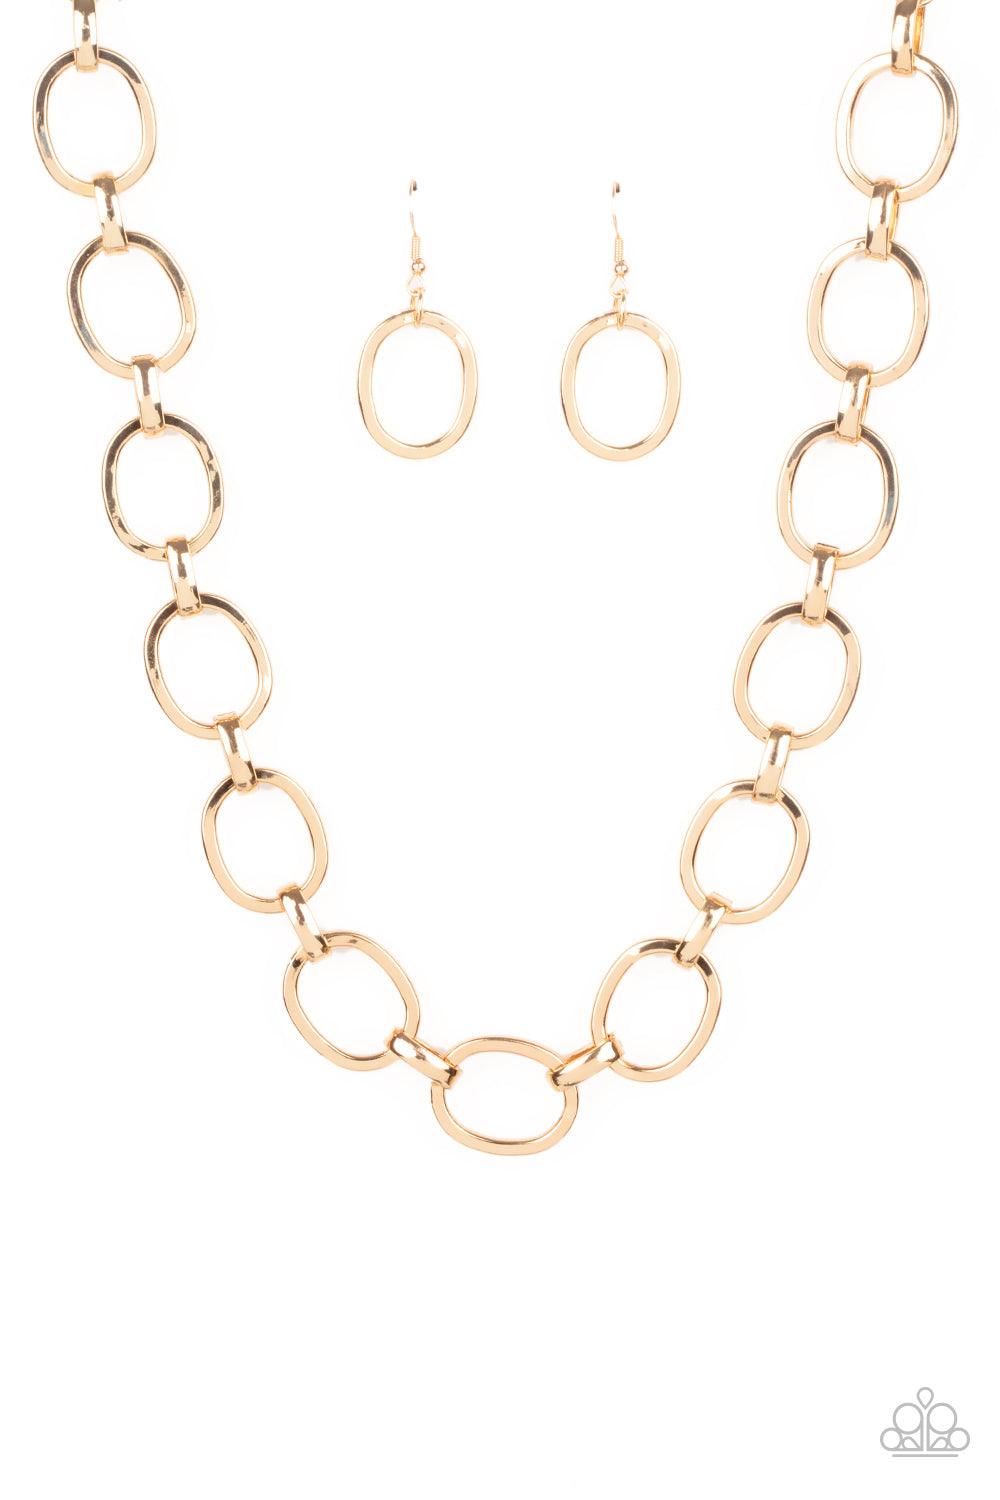 Paparazzi Accessories HAUTE-ly Contested - Gold A glistening series of dramatically oversized ovals and links boldly connect below the collar, creating an intense industrial statement. Features an adjustable clasp closure. Sold as one individual necklace.